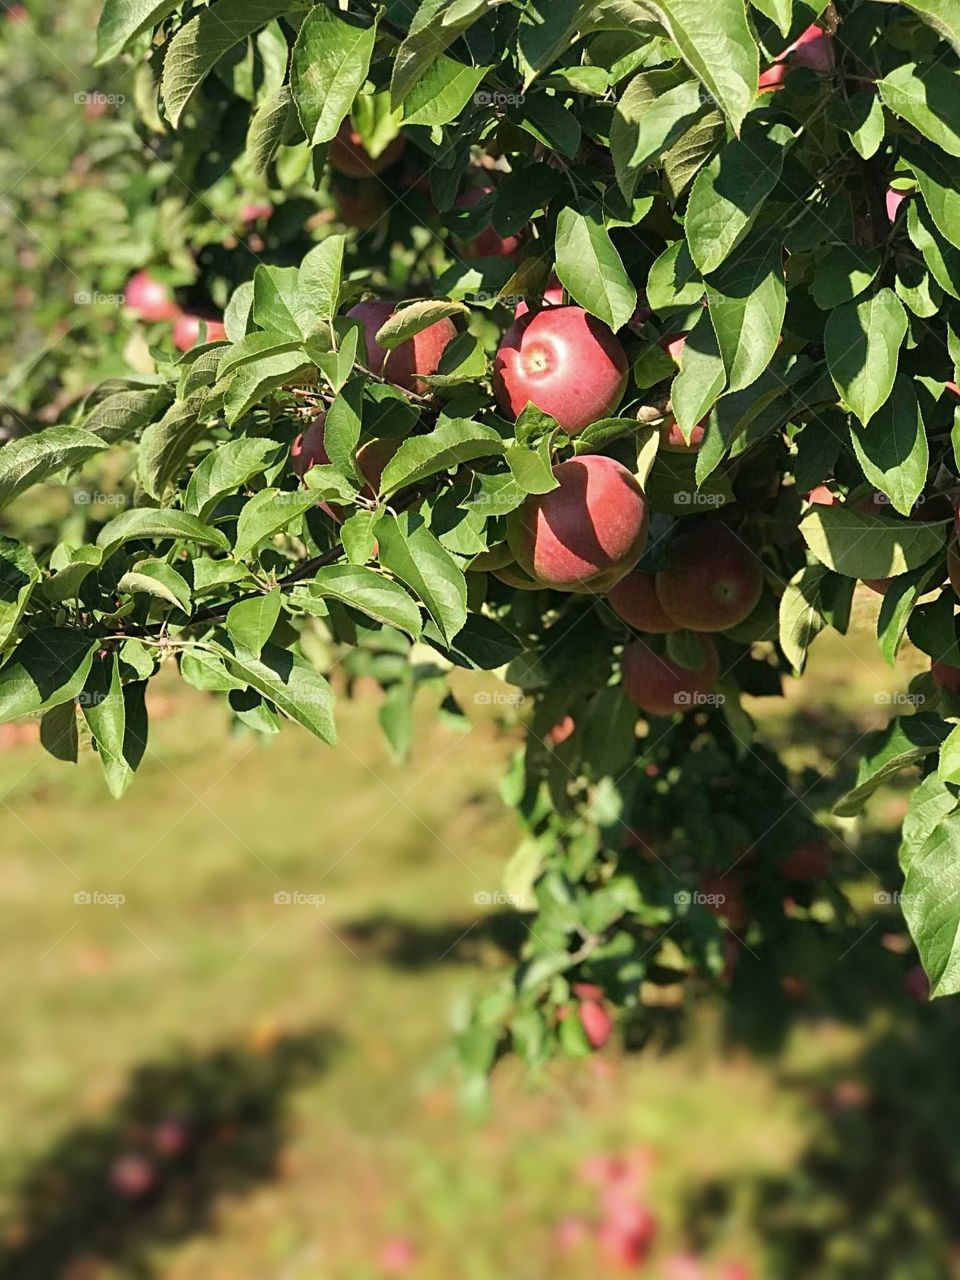 Apple picking in the fall in maine 2017